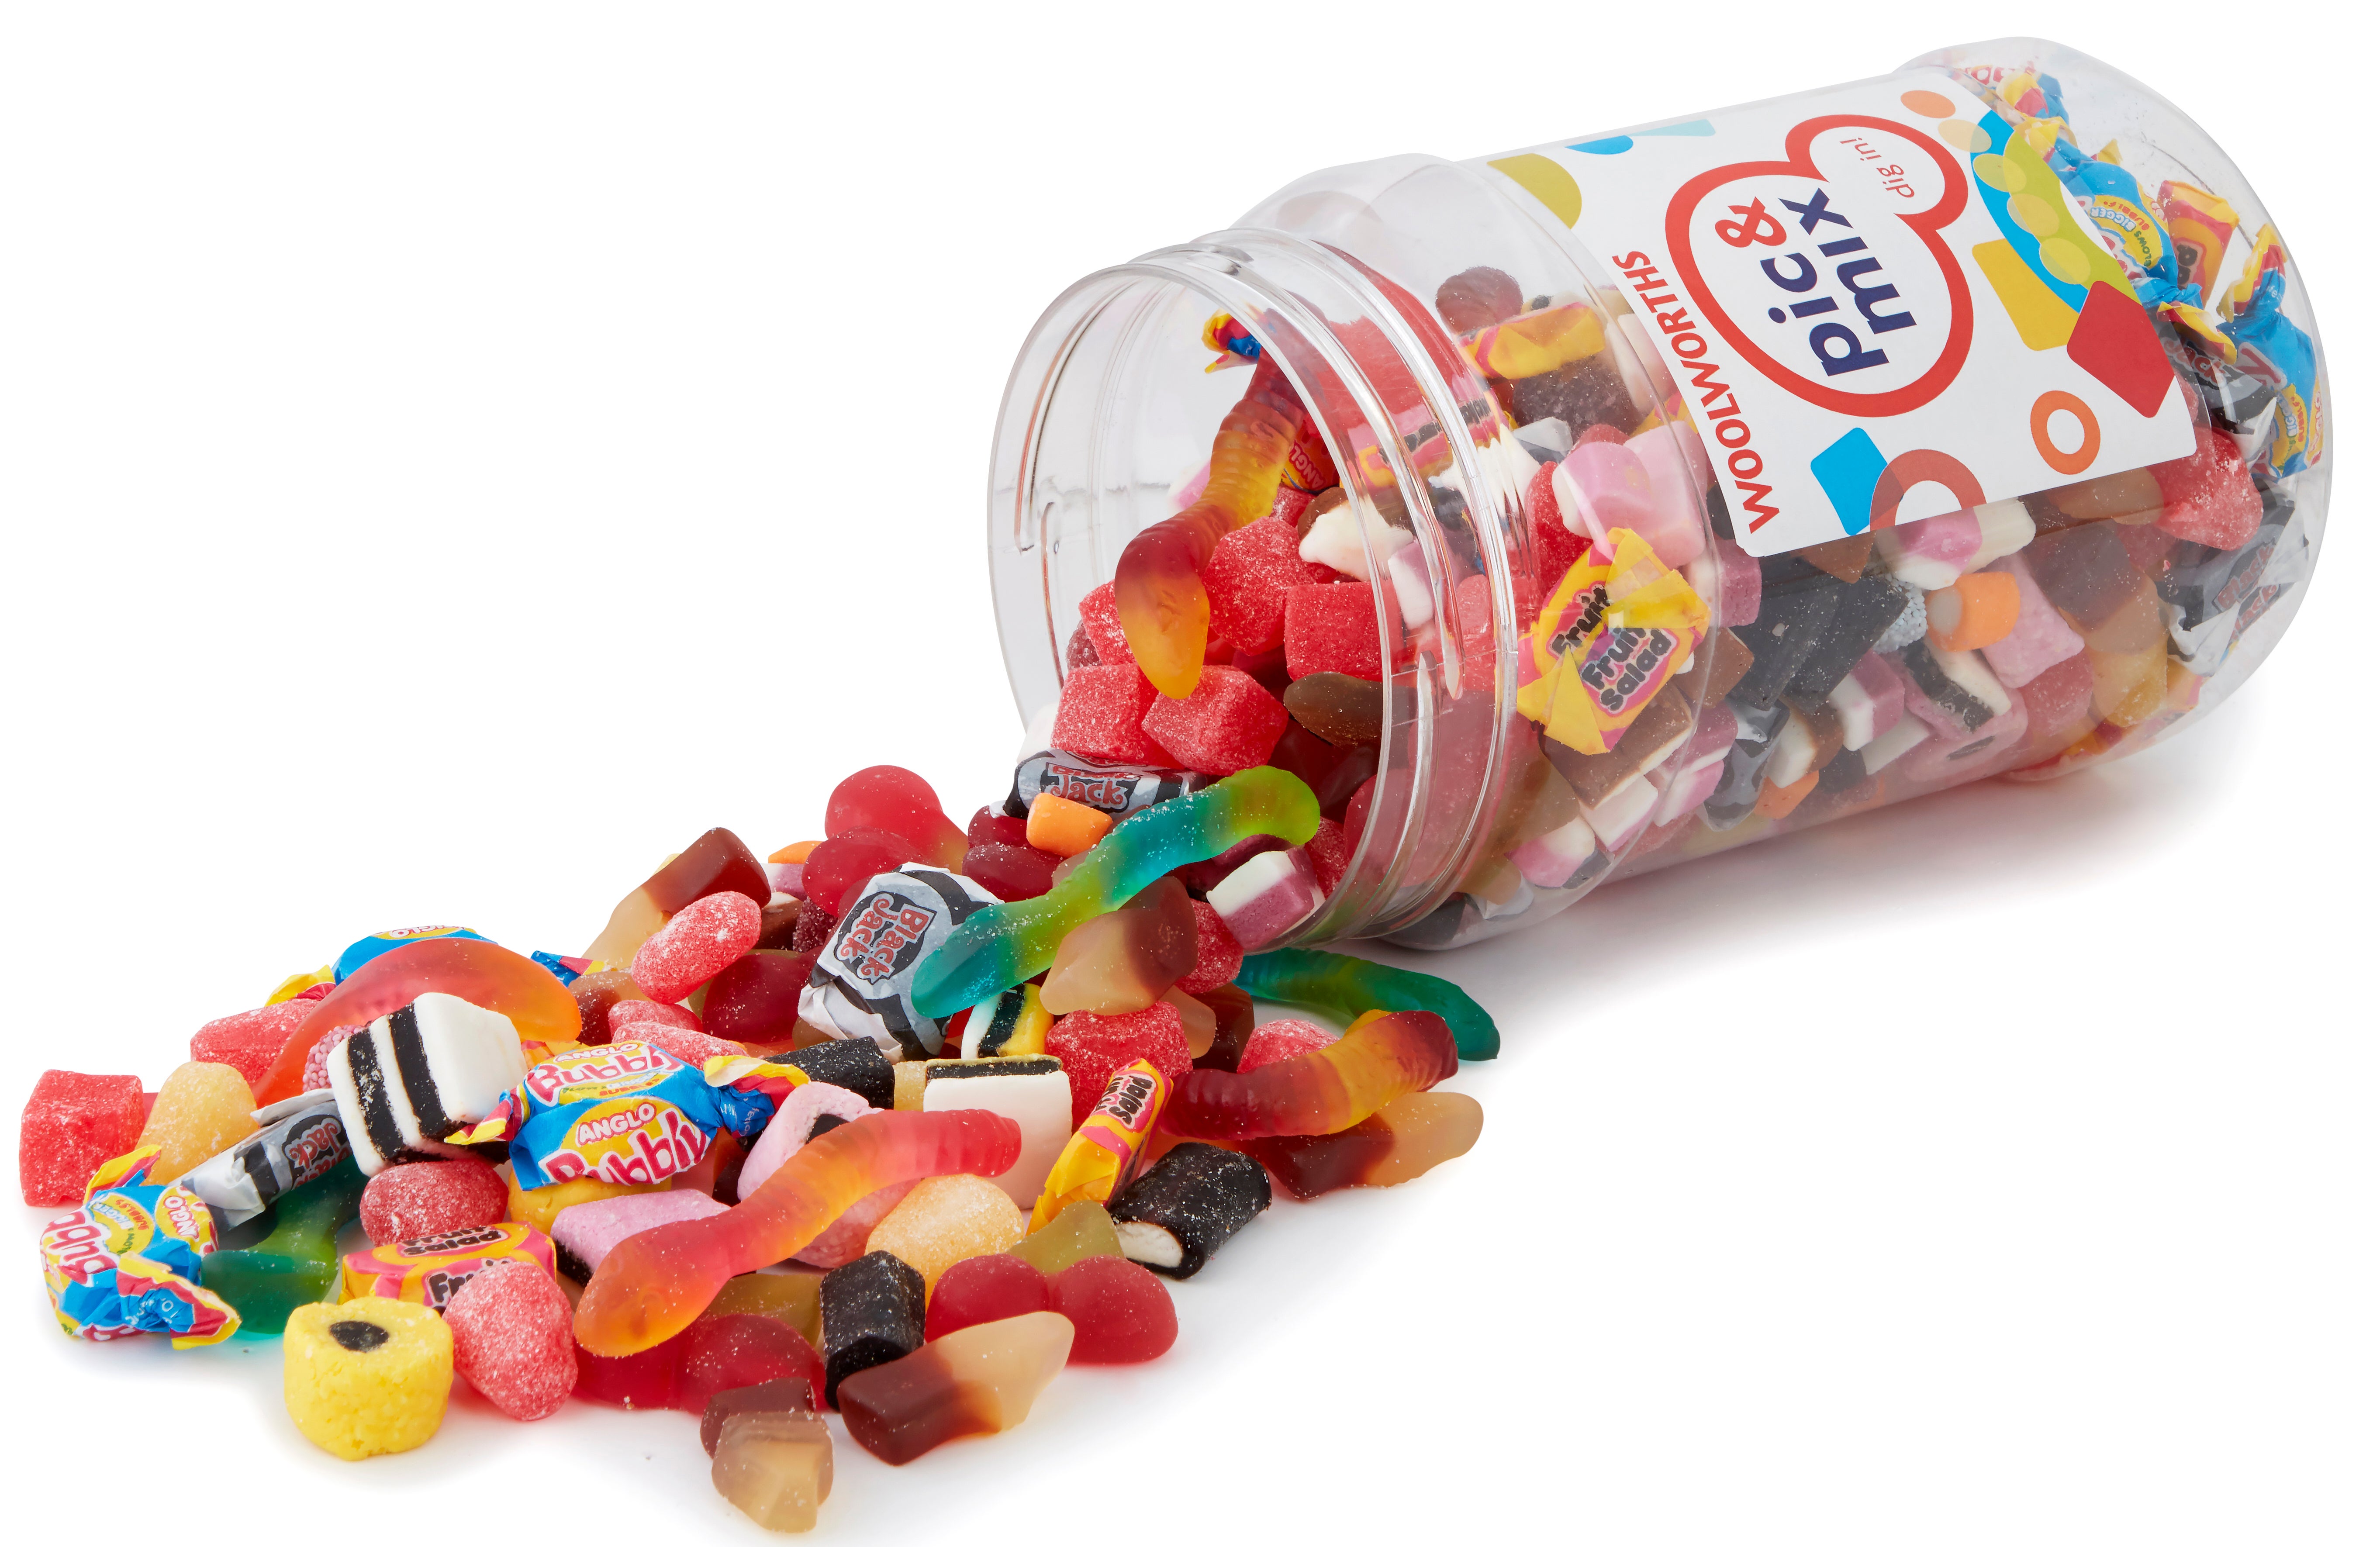 Woolworths pic 'n’ mix jar is back and filled with familiar favourites